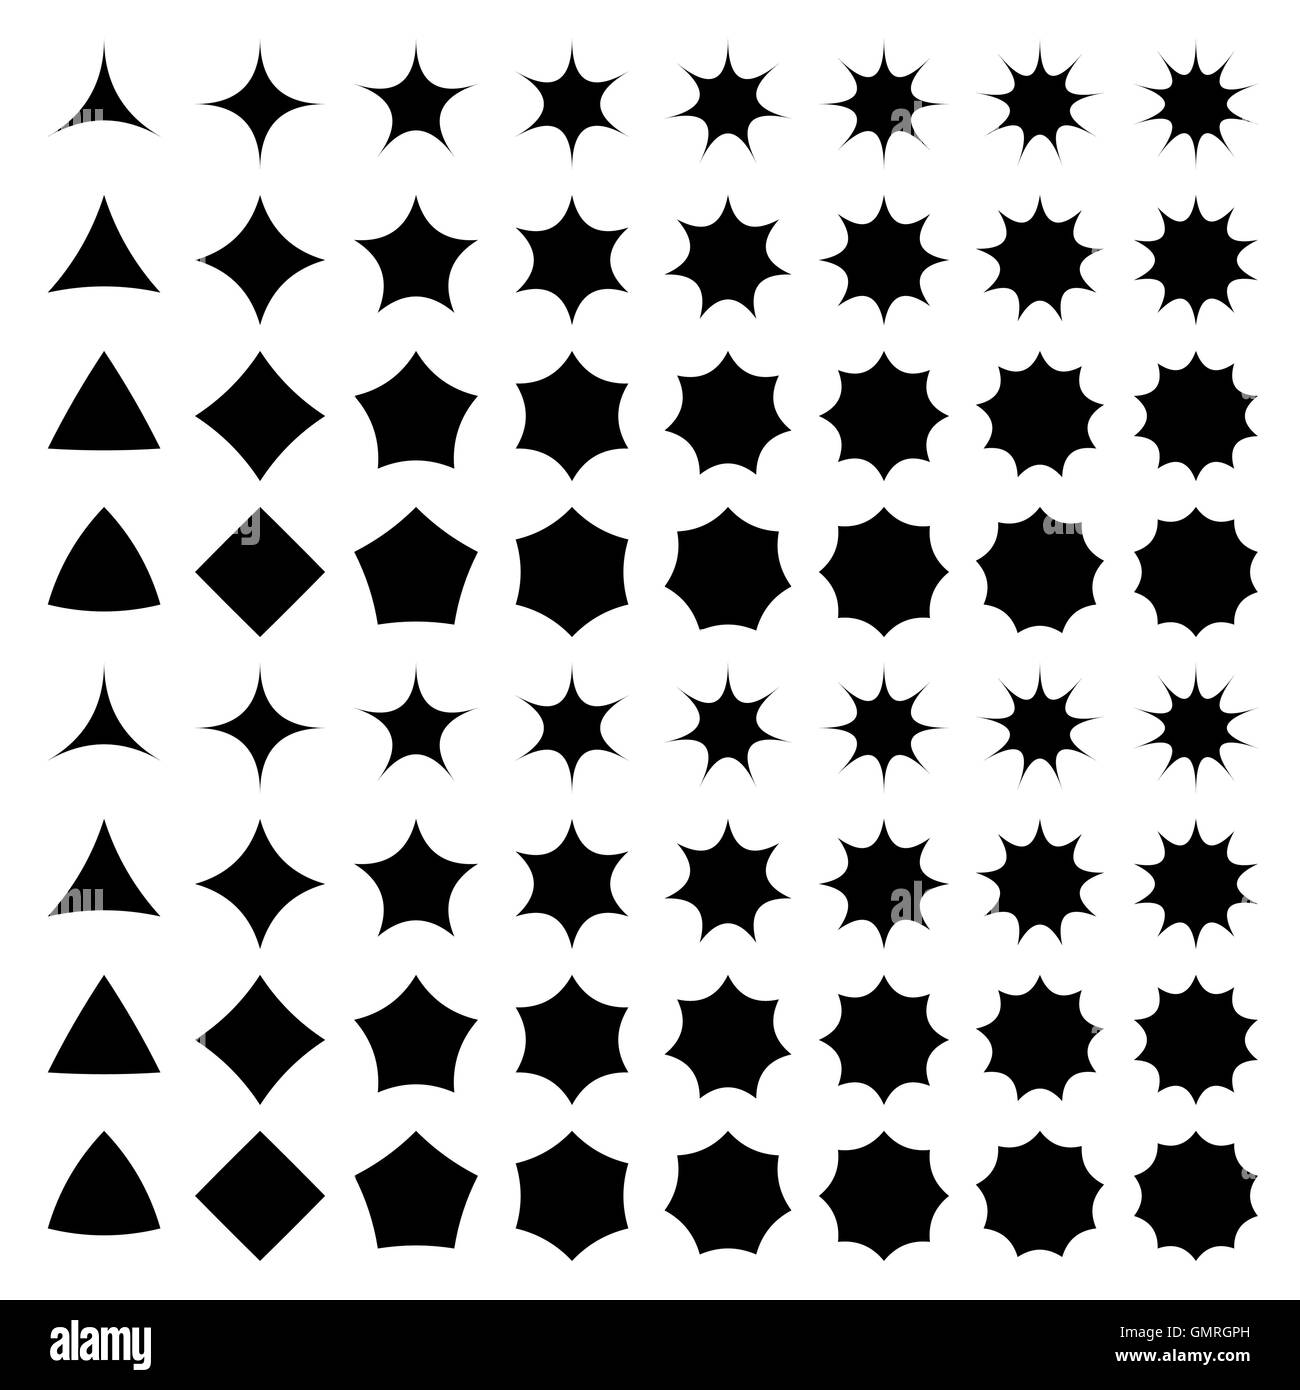 Curved star silhouette collection Stock Vector